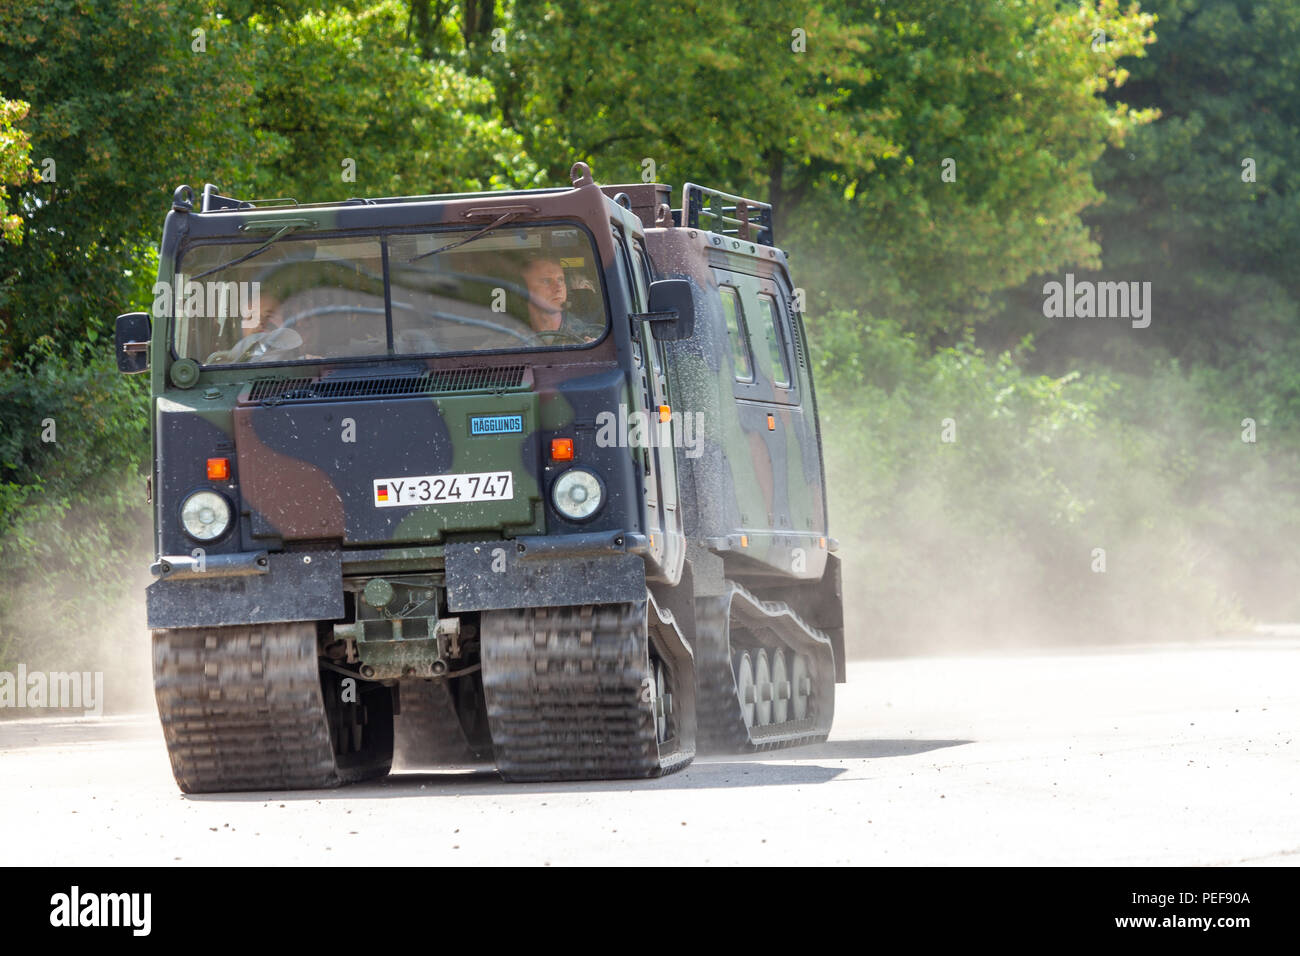 FELDKIRCHEN / GERMANY - JUNE 9, 2018: German armoured personnel carrier Bandvagn 206, from Bundeswehr, drives on a road at Day of the Bundeswehr. Stock Photo